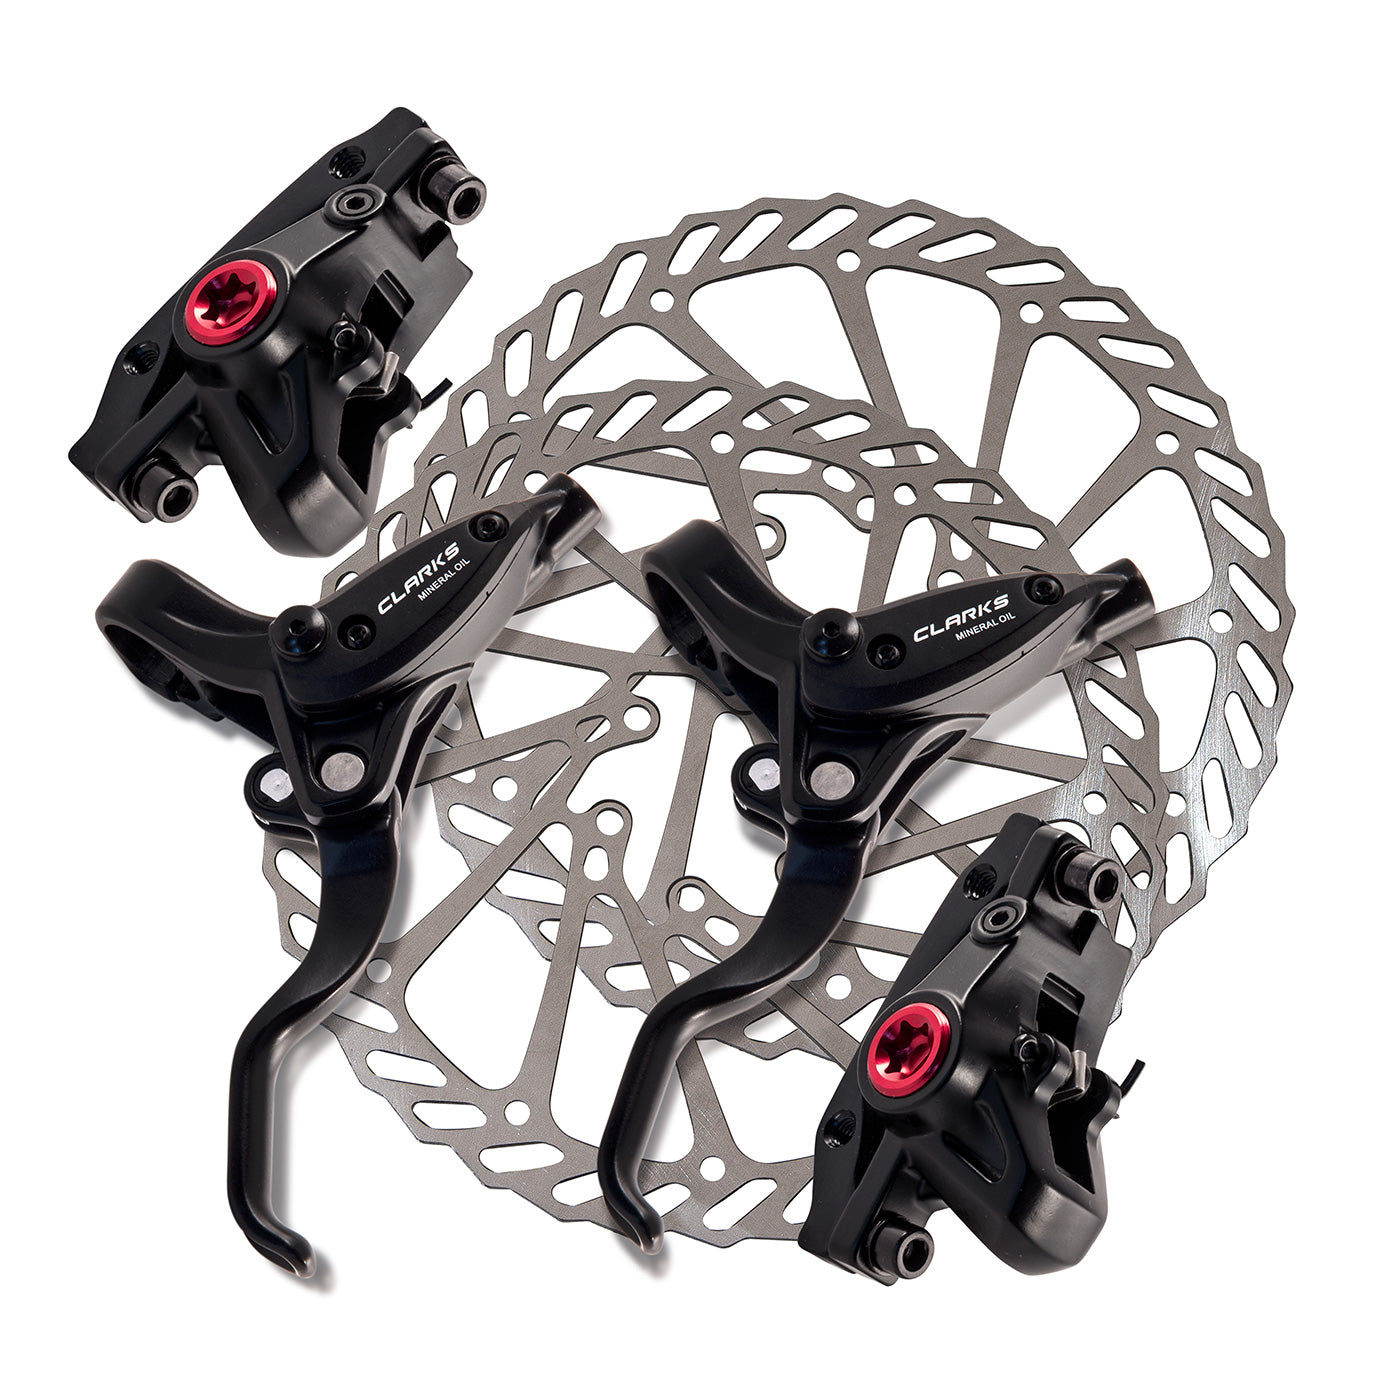 View Clarks M2 Hydraulic Disc Brake Set Front 180mm Rear 160mm information